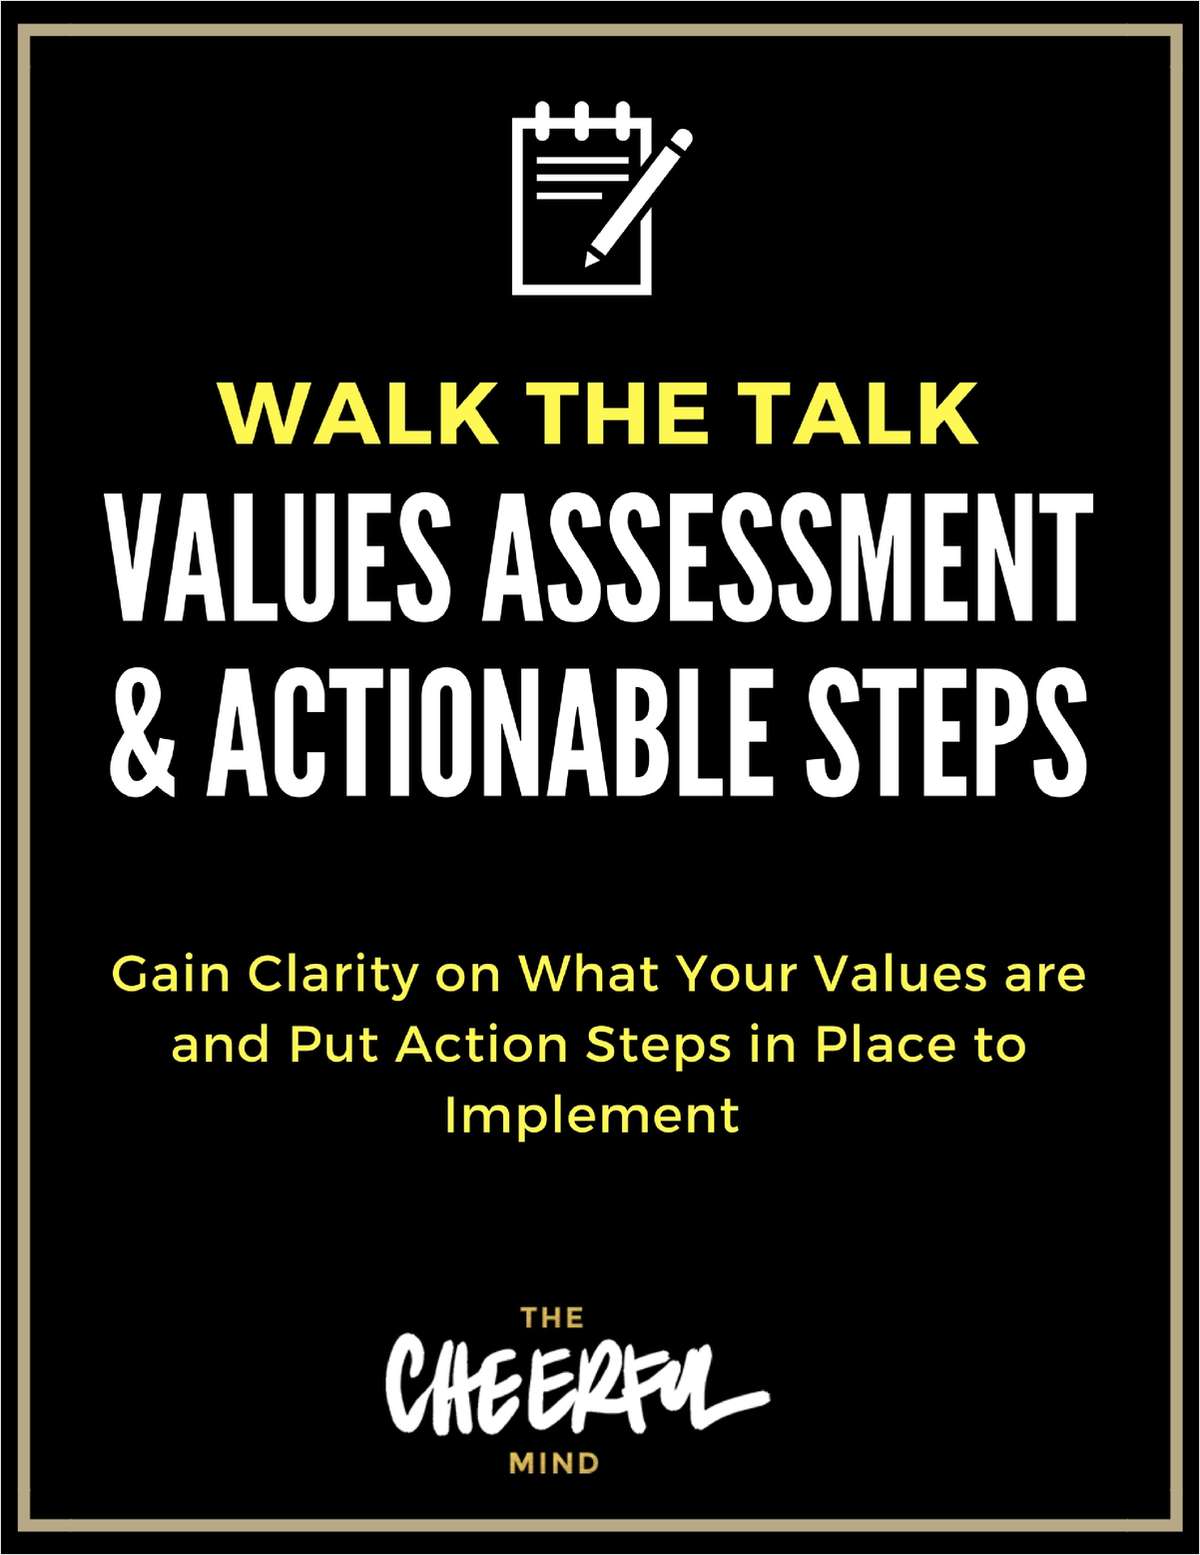 Walk the Talk - Values Assessment & Actionable Steps